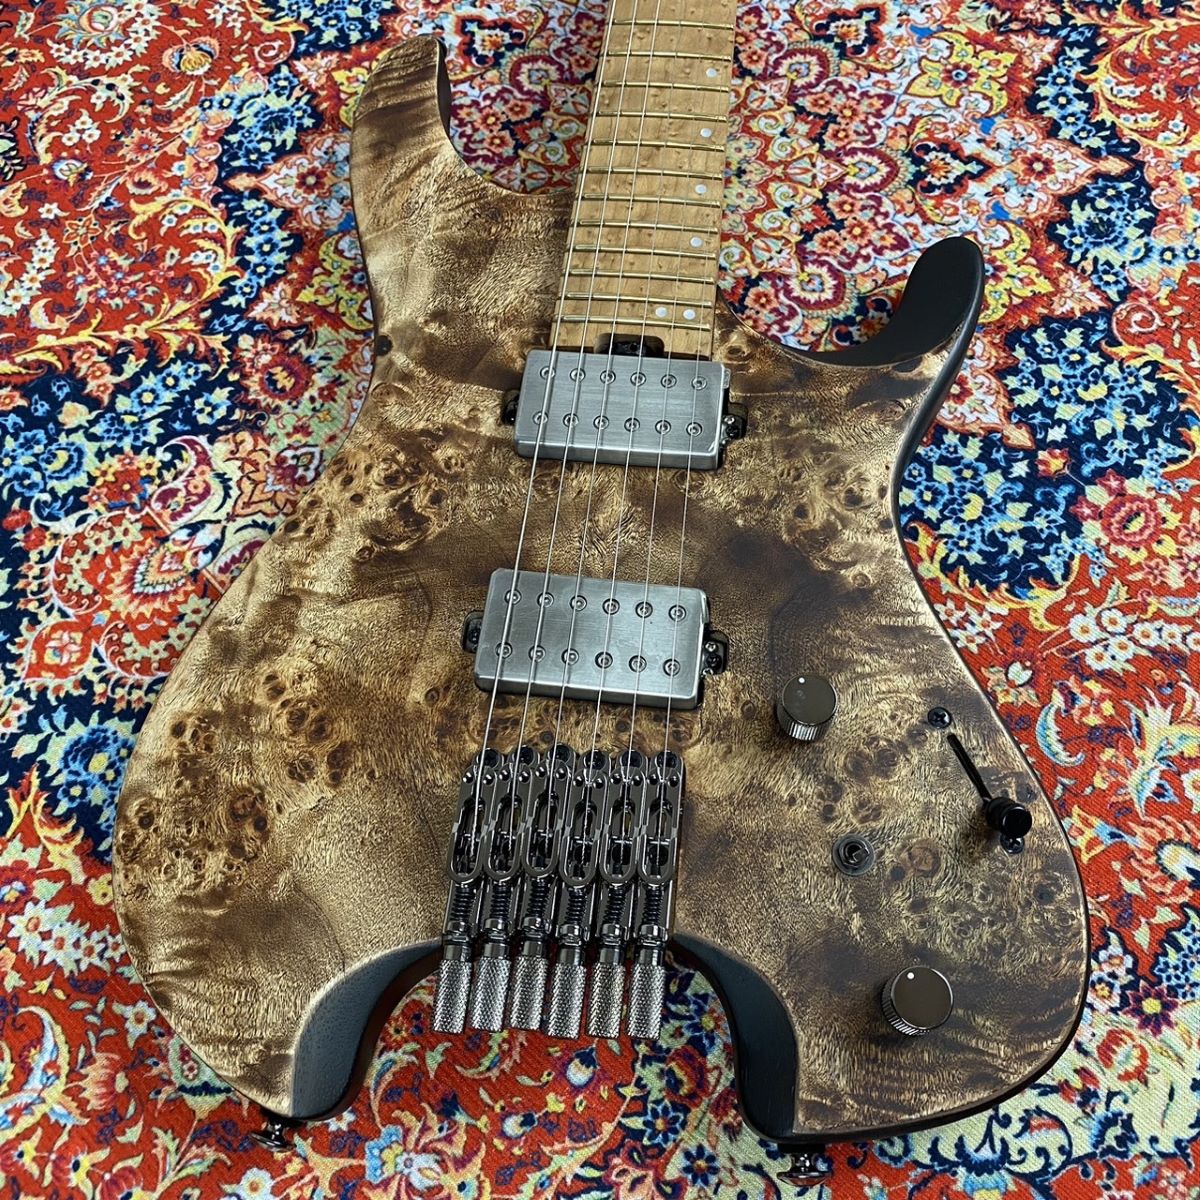 Ibanez Q52PB ABS Antique Brown Stained【現物画像】 アイバニーズ